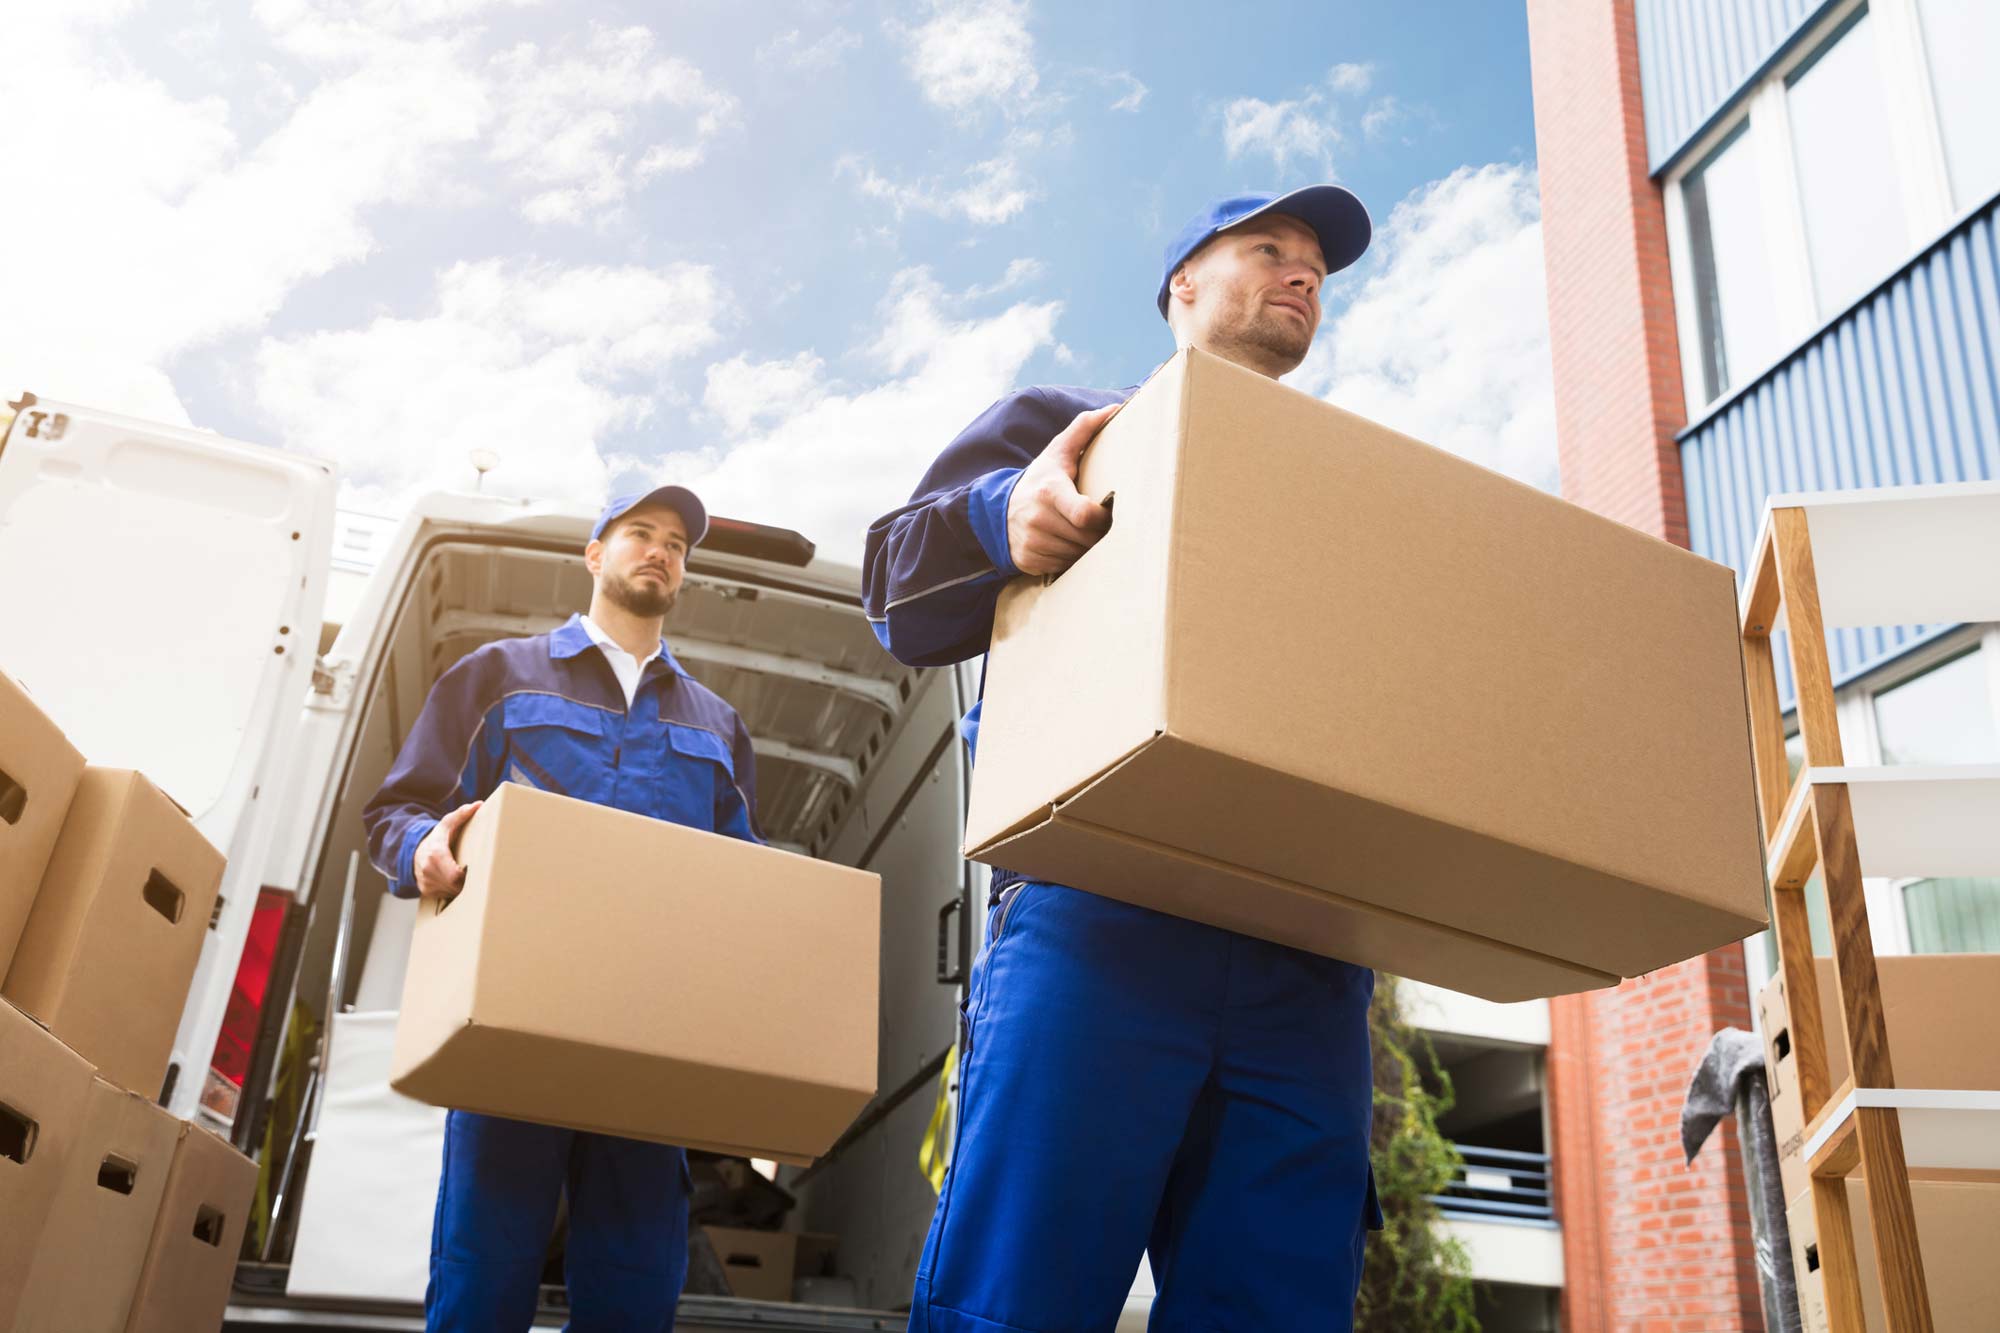 Get To Know About Some Great Benefits Of Hiring Relocation Services!